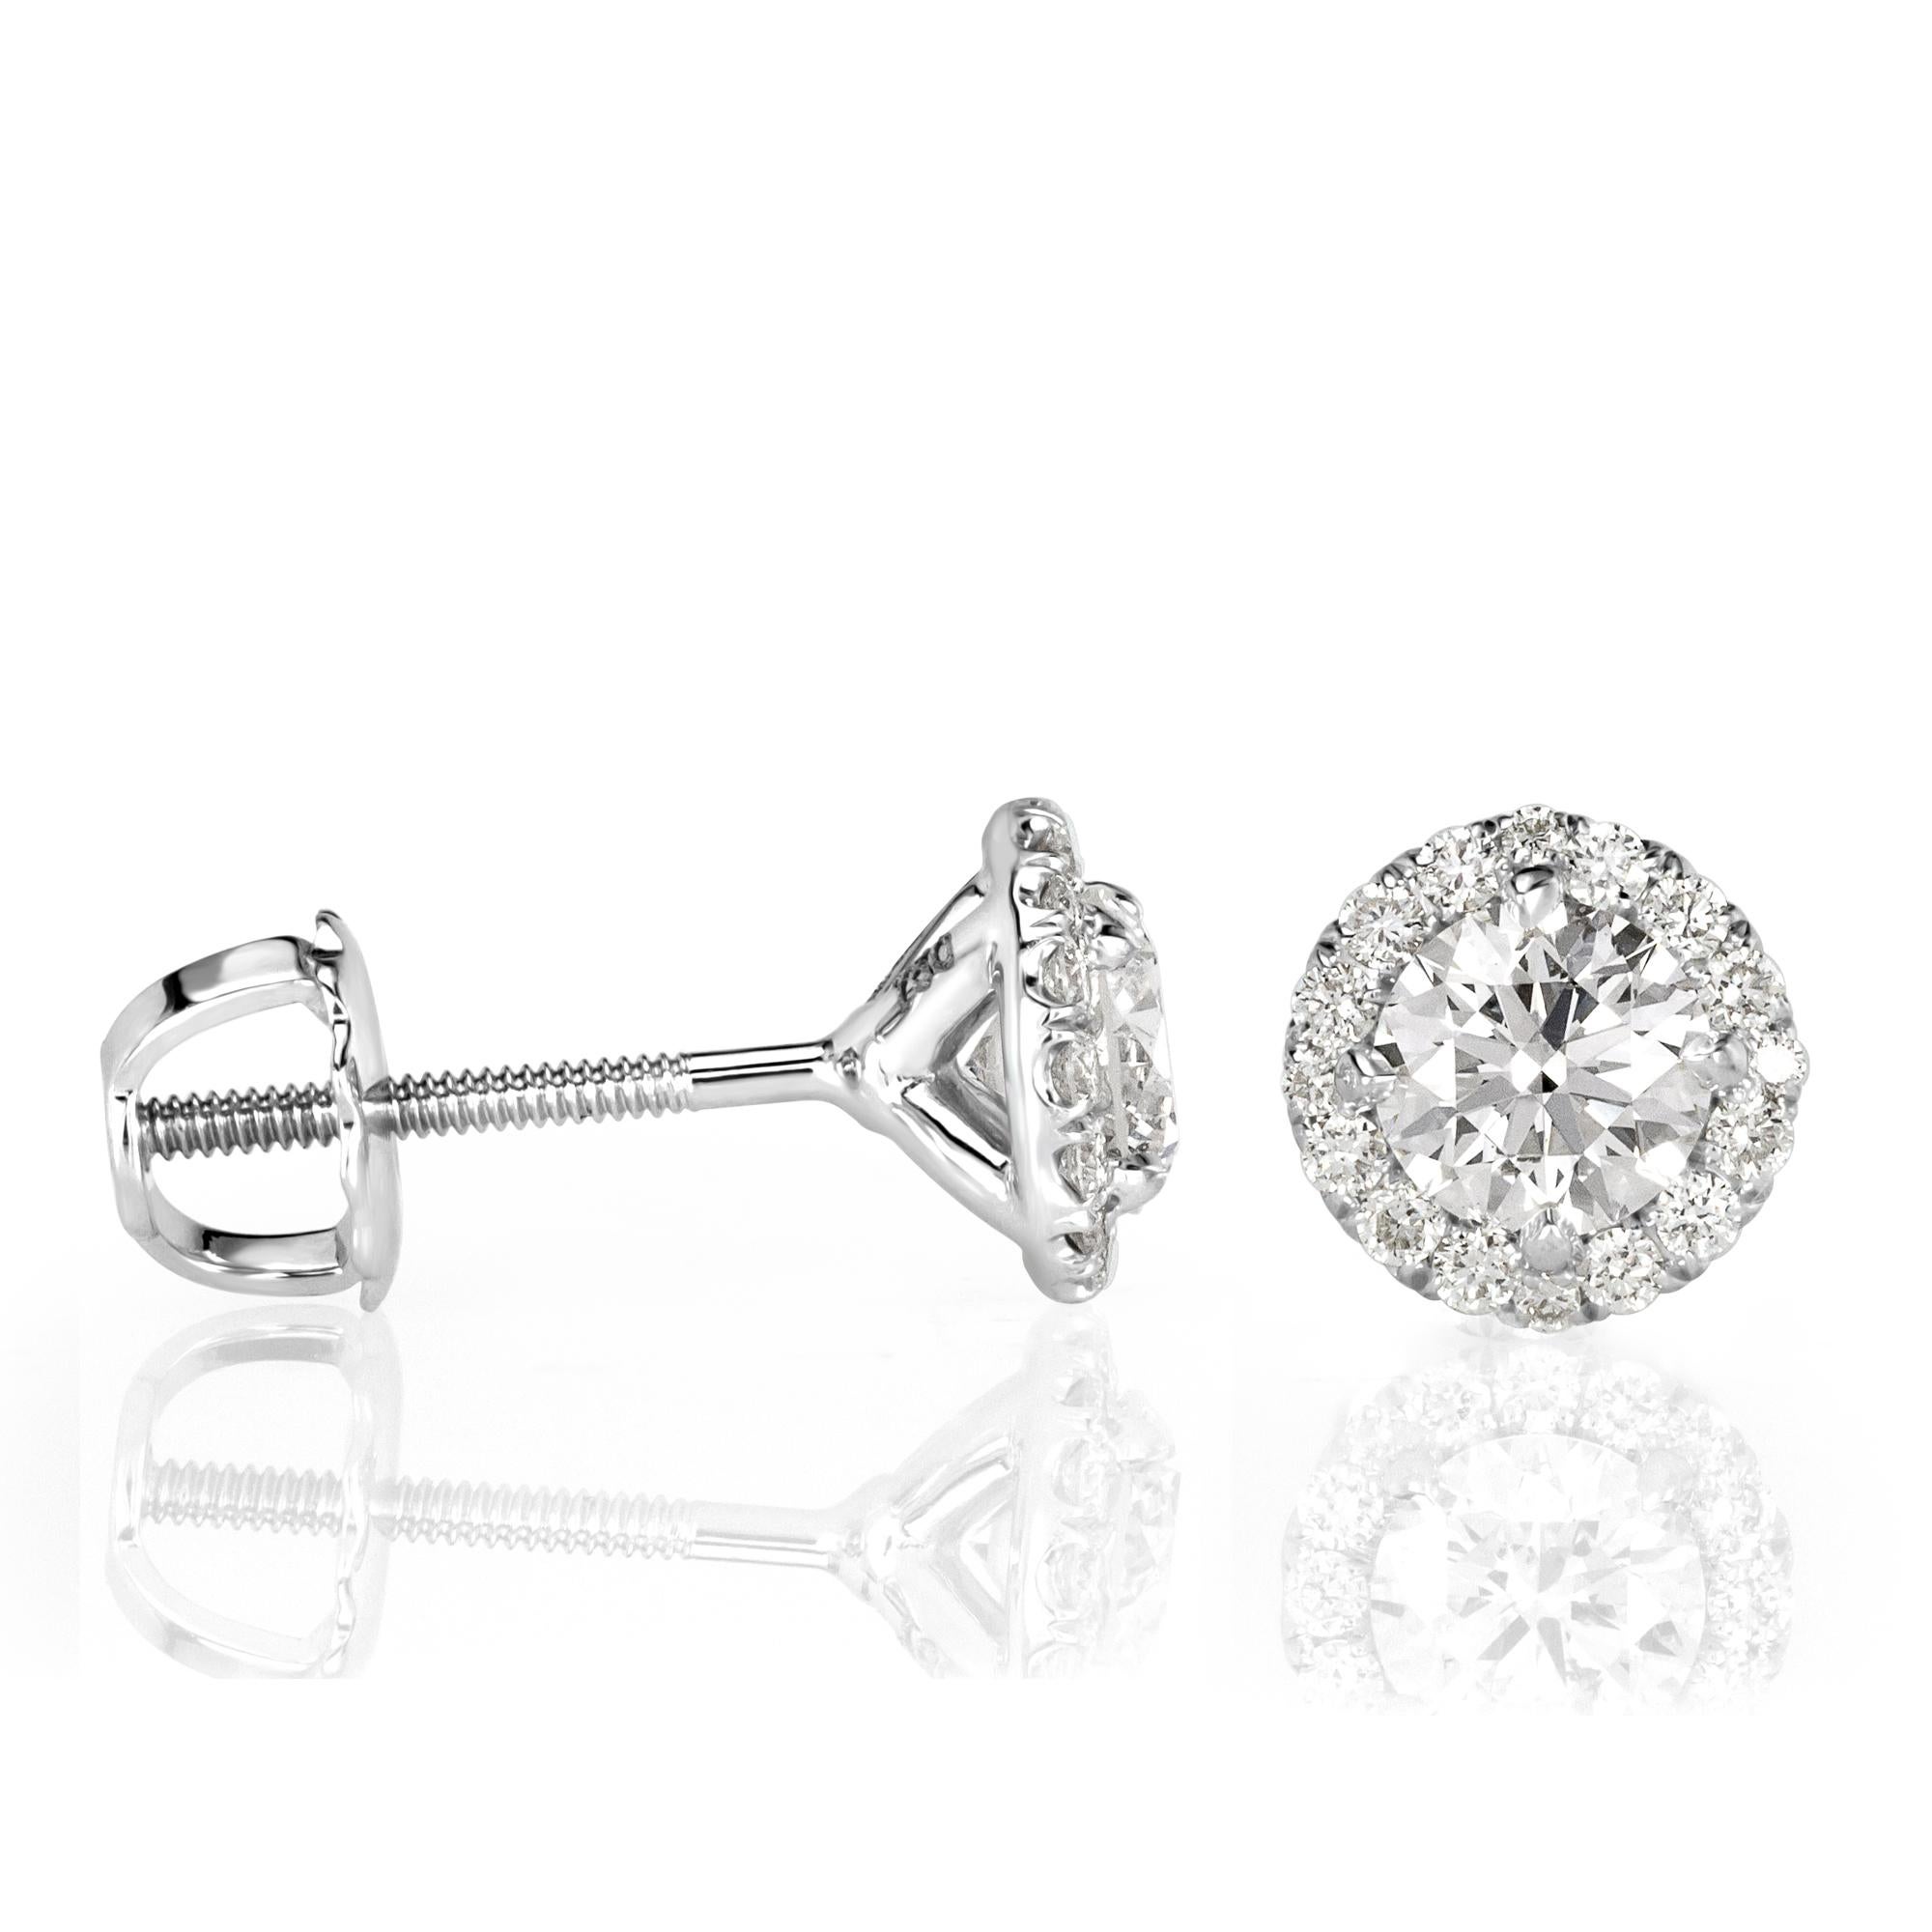 Custom created in 18k white gold, this mesmerizing pair of diamond stud earrings showcases two larger round brilliant cut diamonds each complimented by a dazzling micro pavé halo. The diamonds total 1.02ct in weight and are graded at F-G in color,